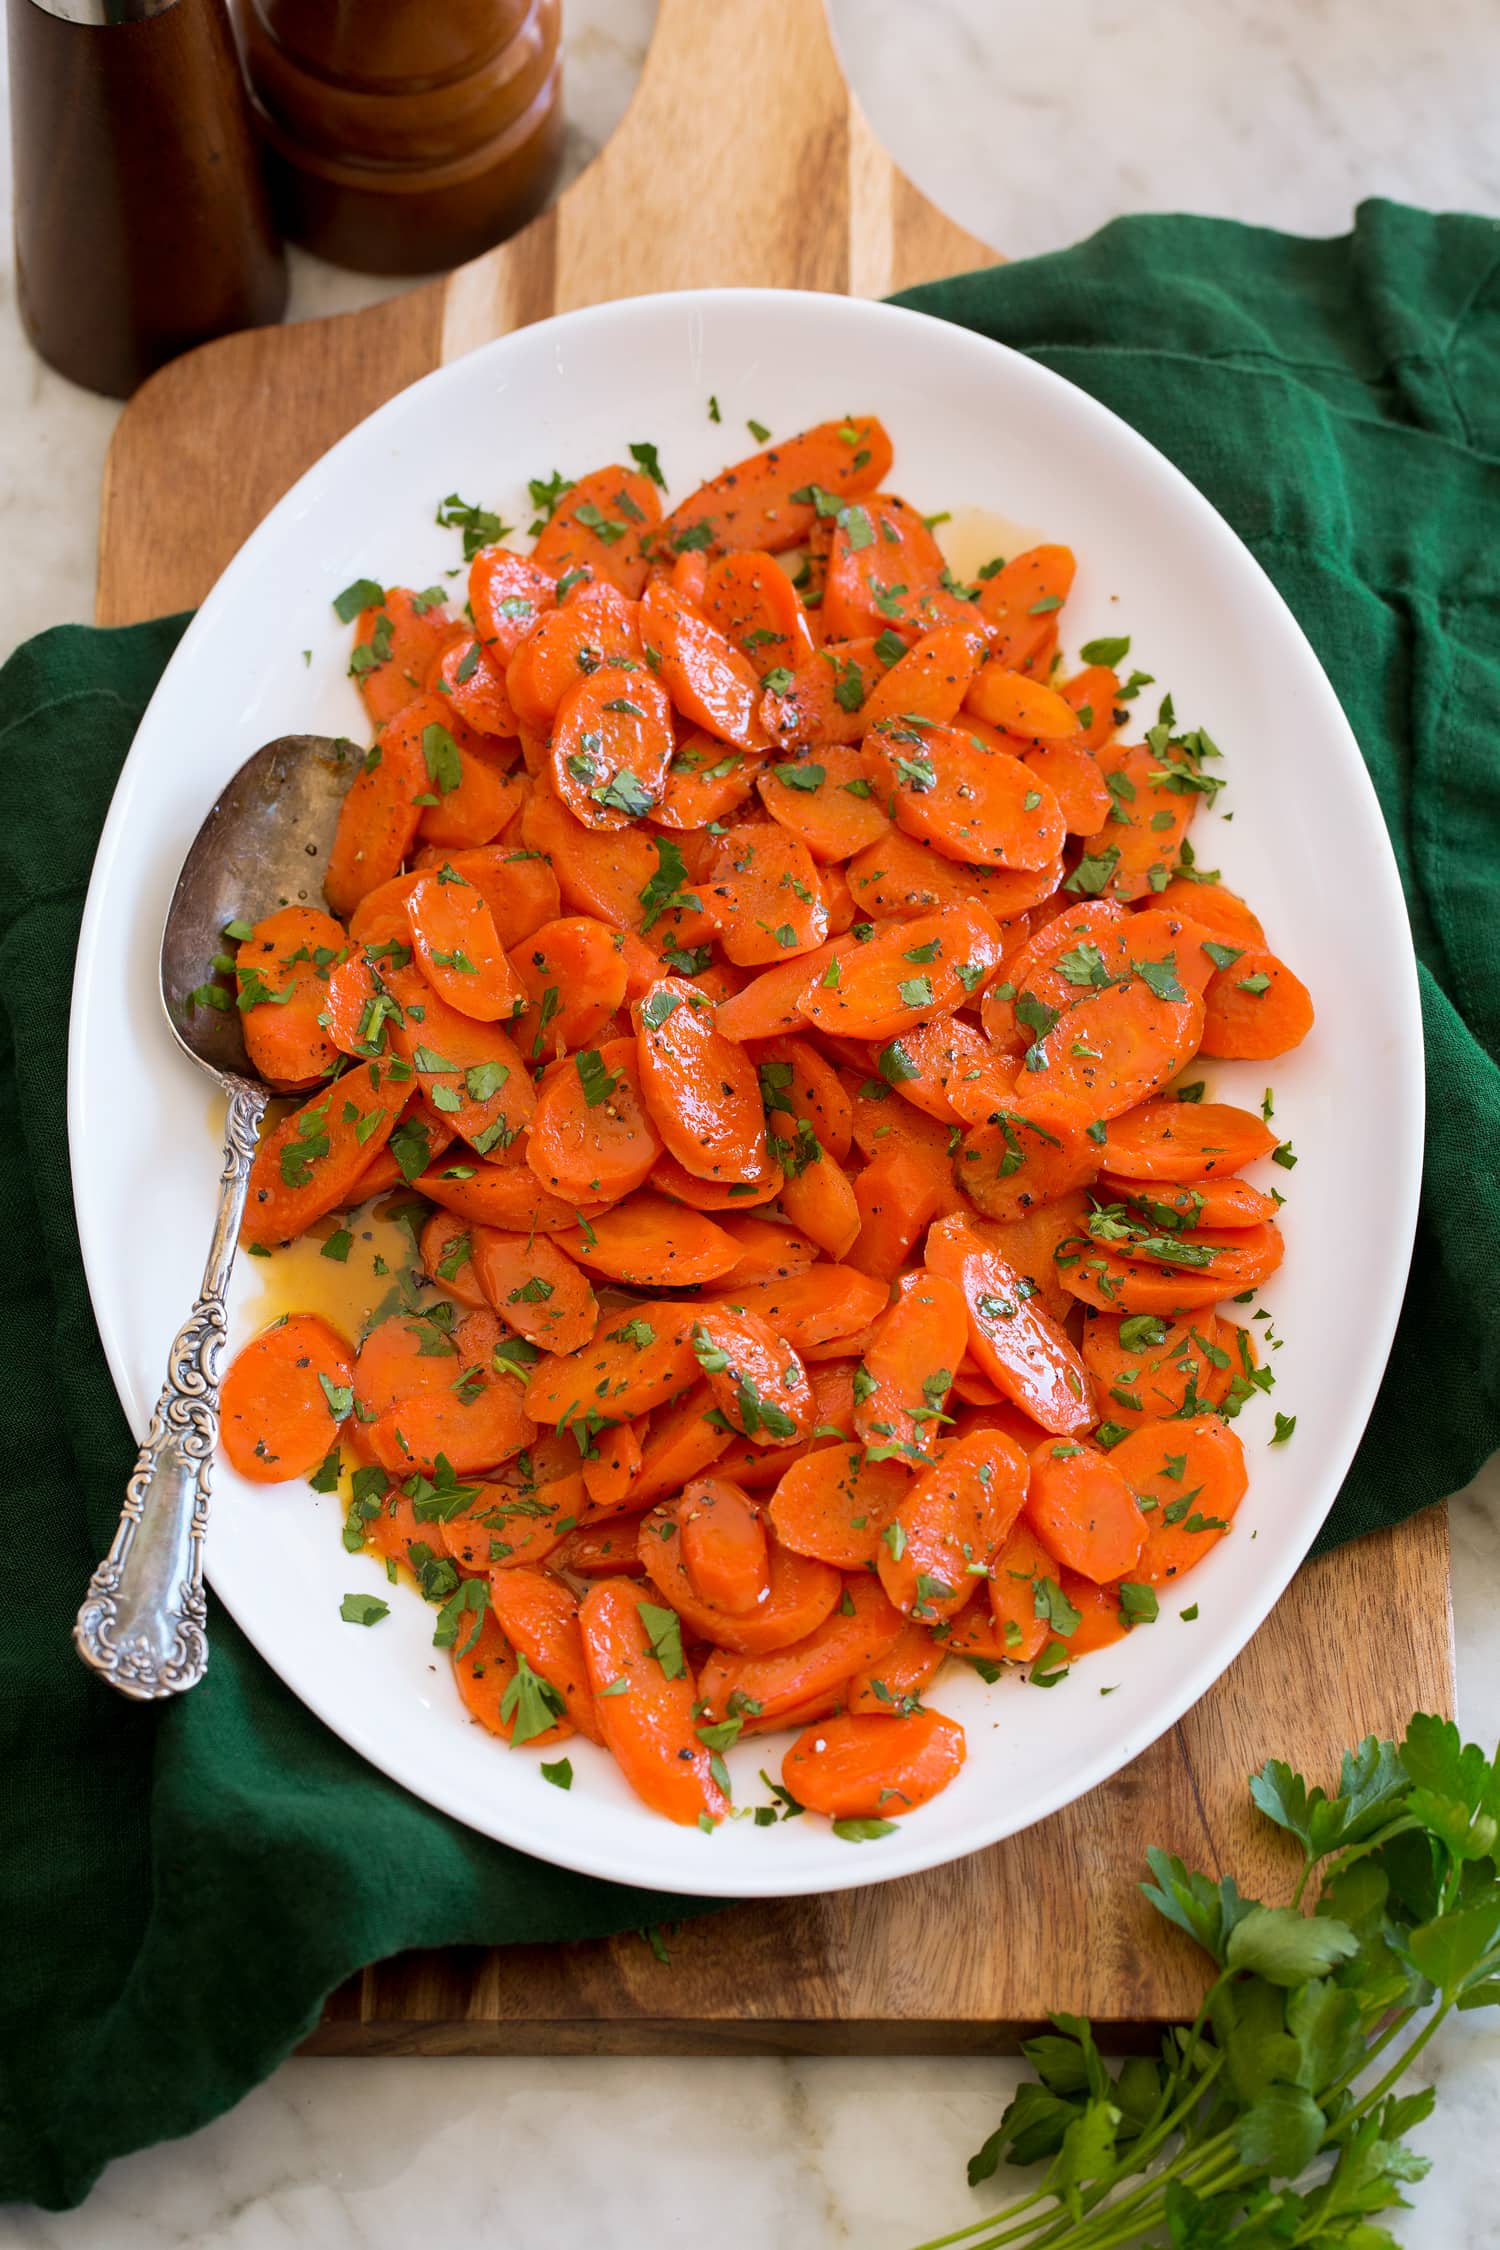 Glazed carrots shown served on a white oval platter set over a wooden tray and a green cloth.